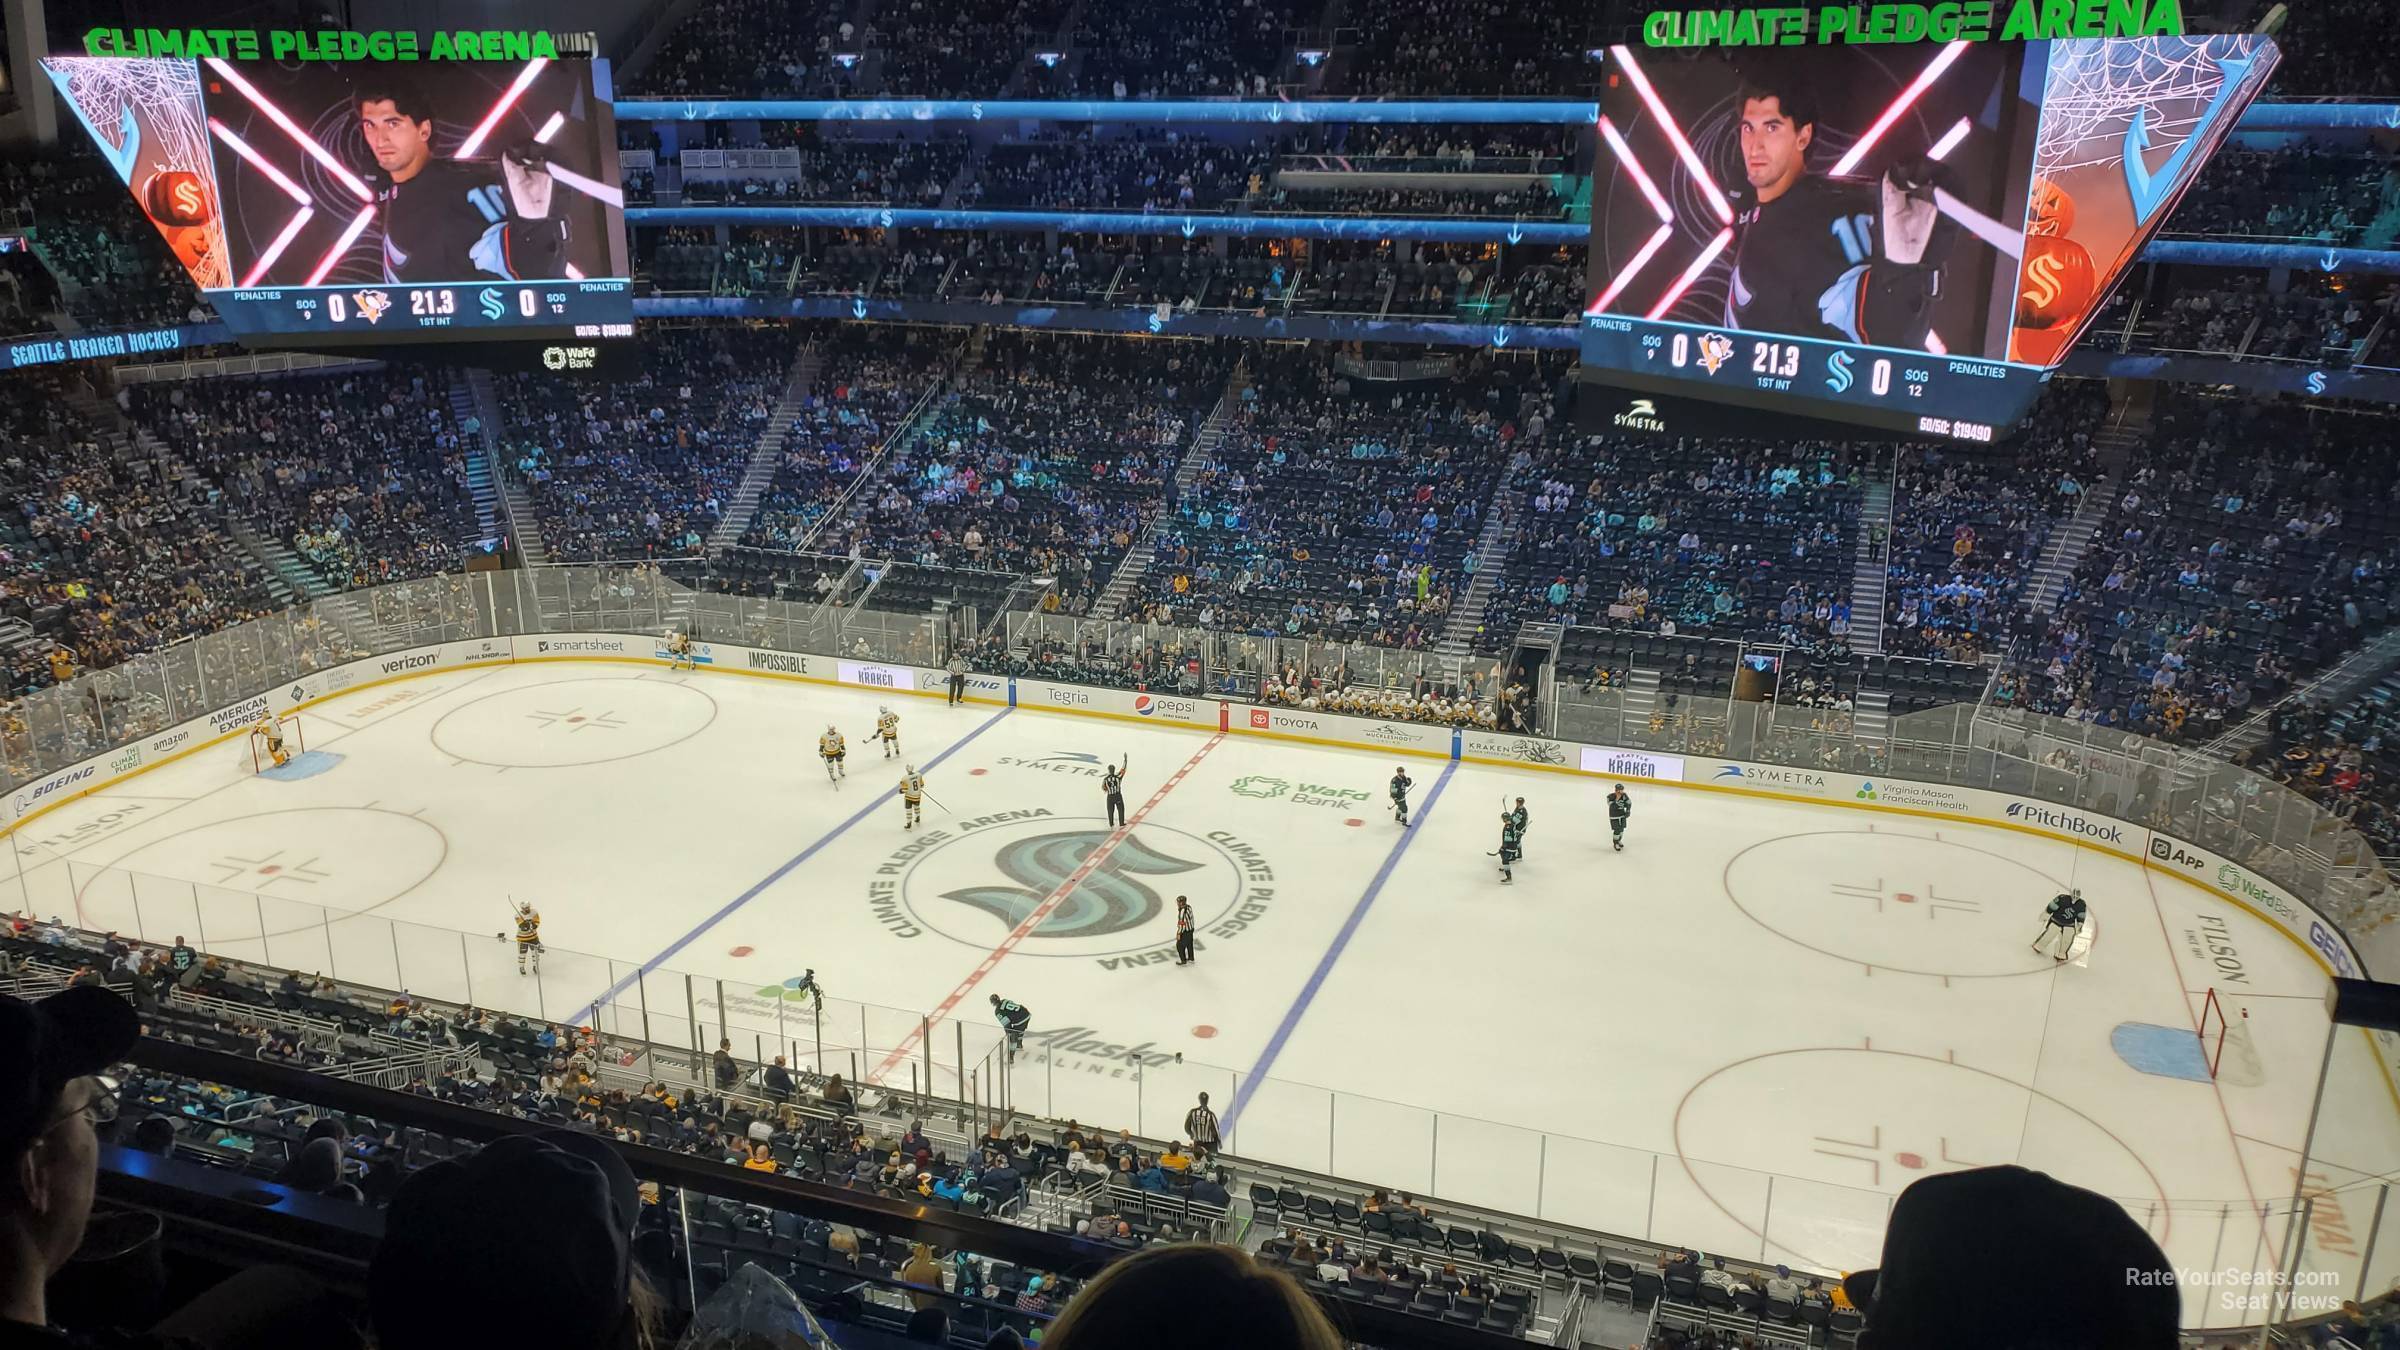 section 213, row c seat view  for hockey - climate pledge arena